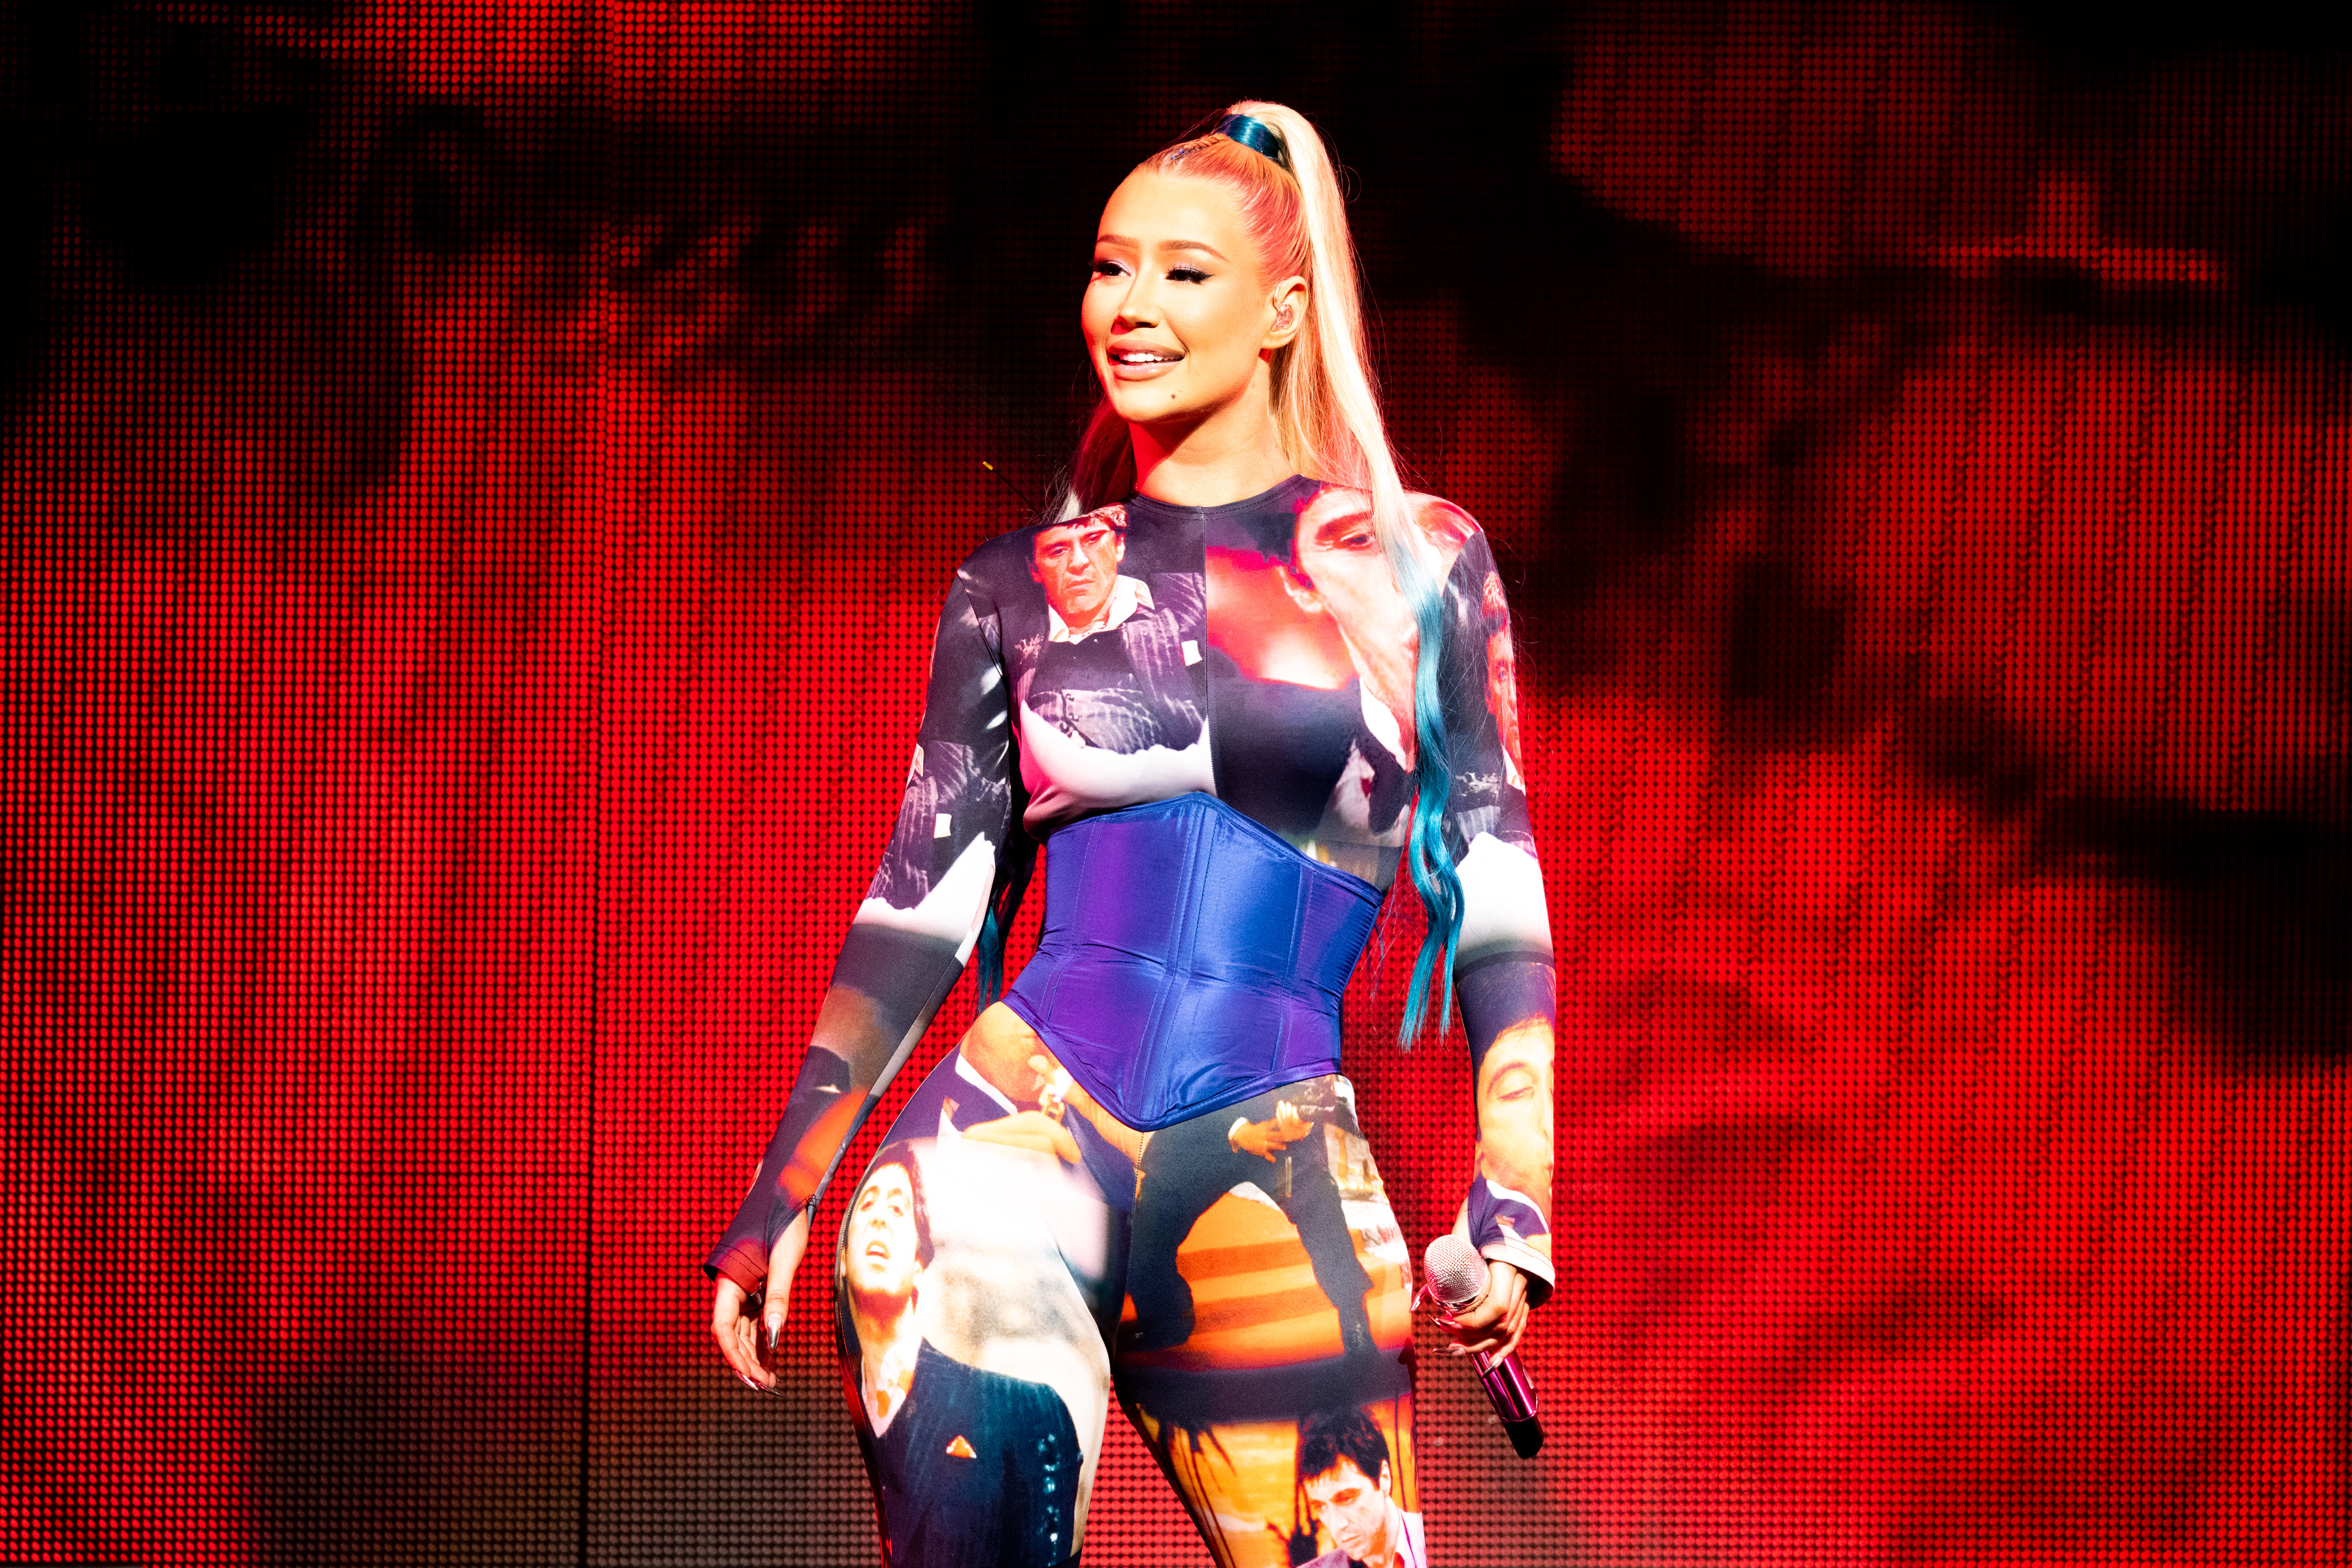 Iggy Azalea performs at YouTube Theater on September 22, 2021, in Inglewood, California. | Source: Getty Images